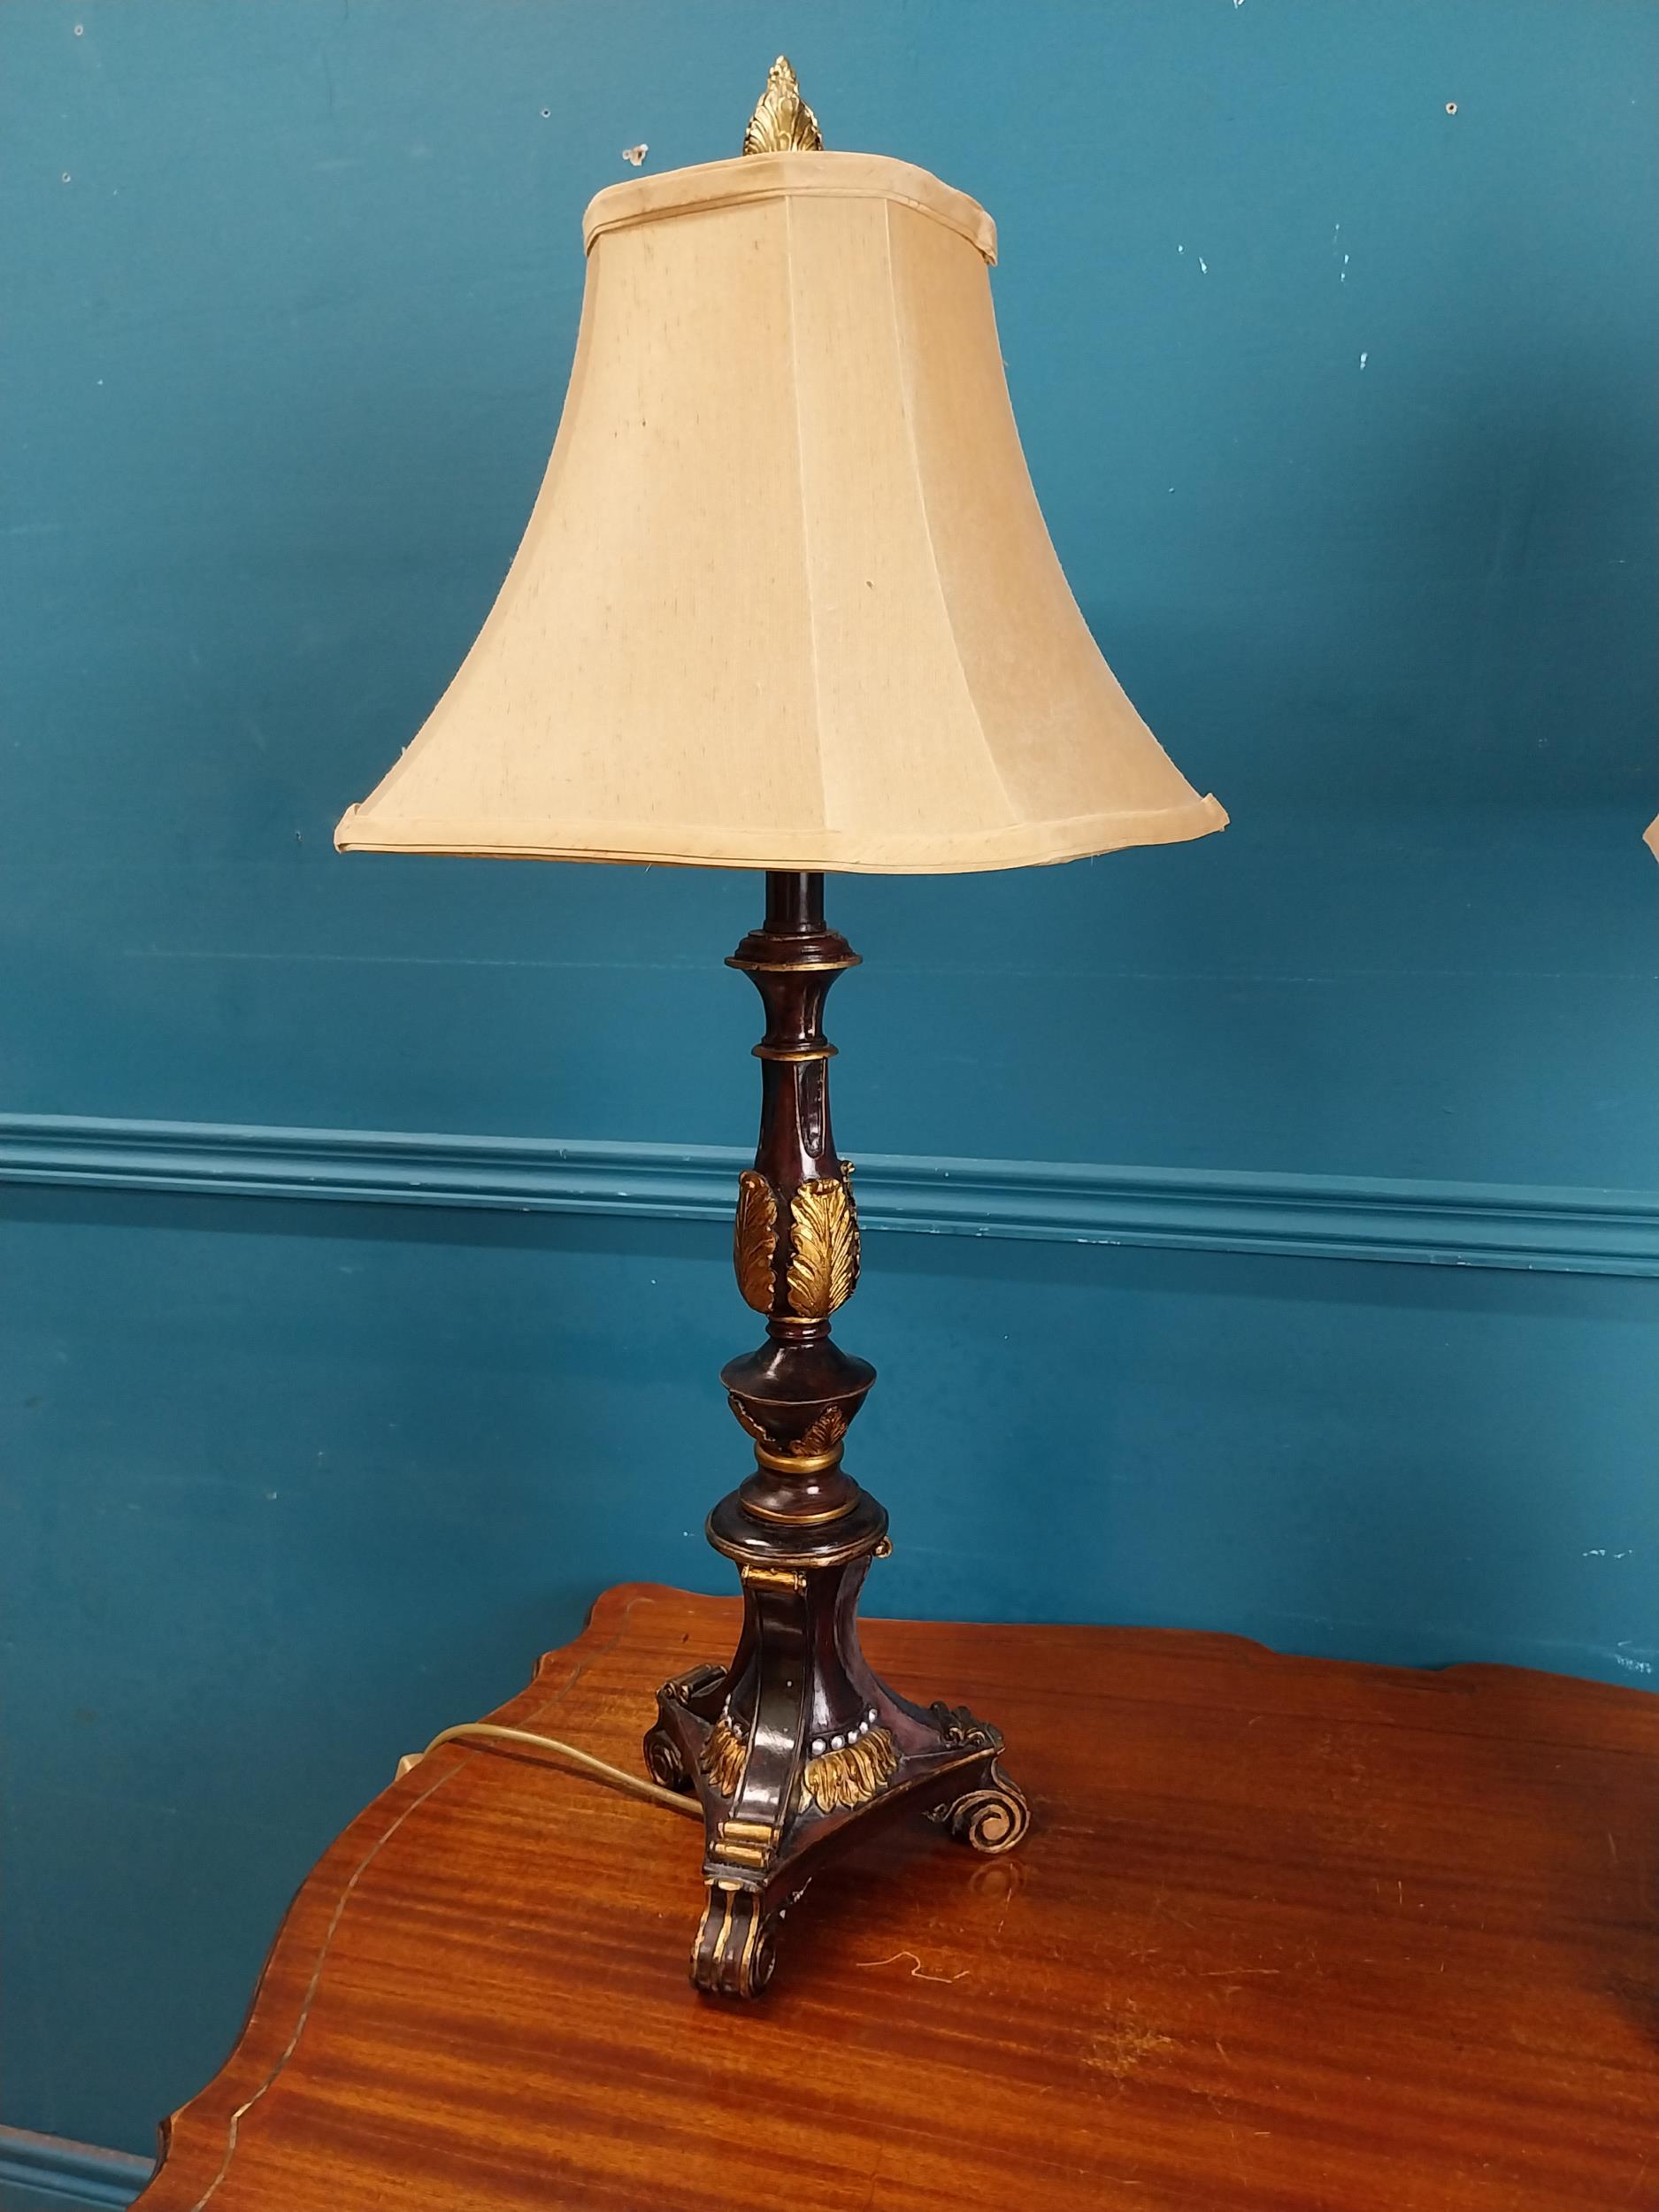 Pair of decorative table lamps with cloth shades. {80 cm H x 31 cm Dia.}. - Image 6 of 6